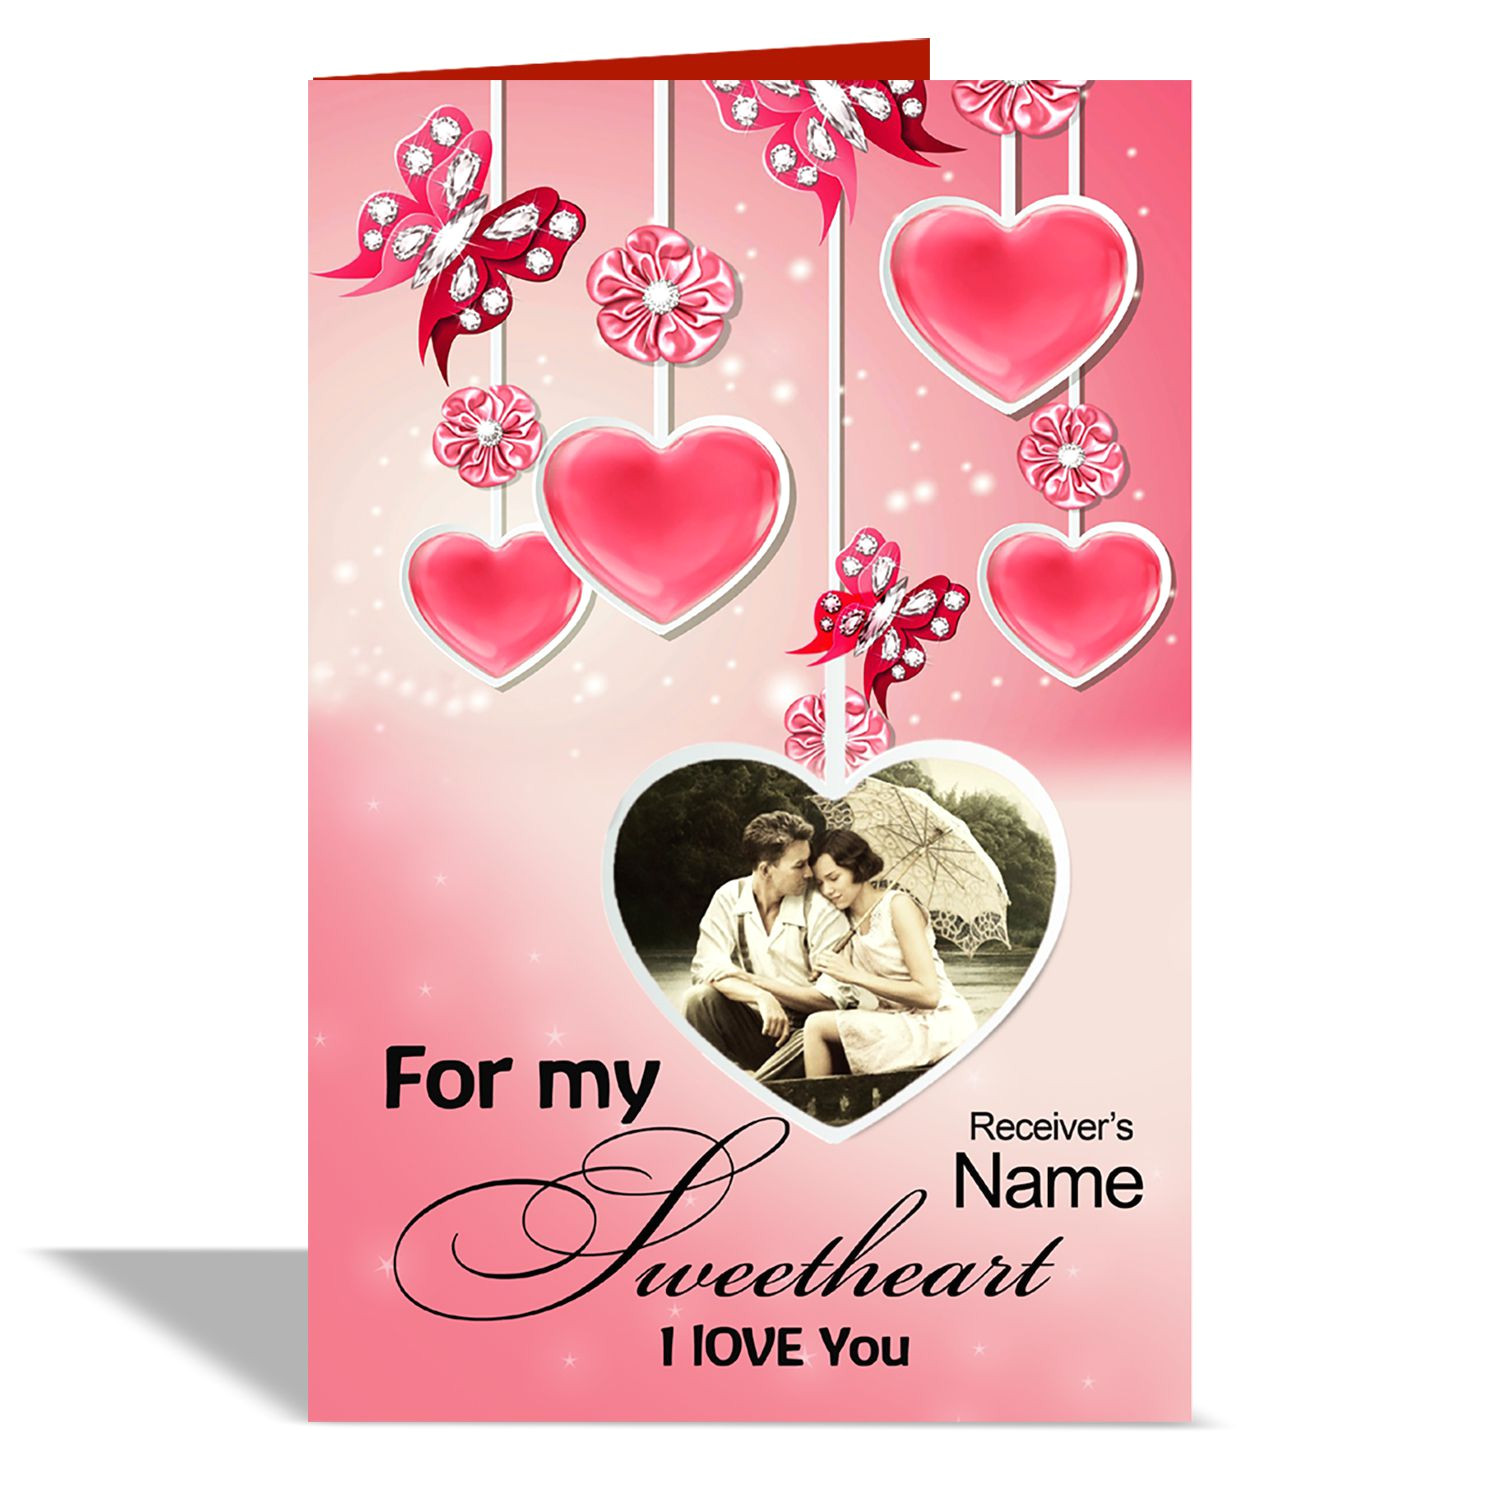 Love Greeting Card with Name Alwaysgift for My Sweetheart Greeting Card